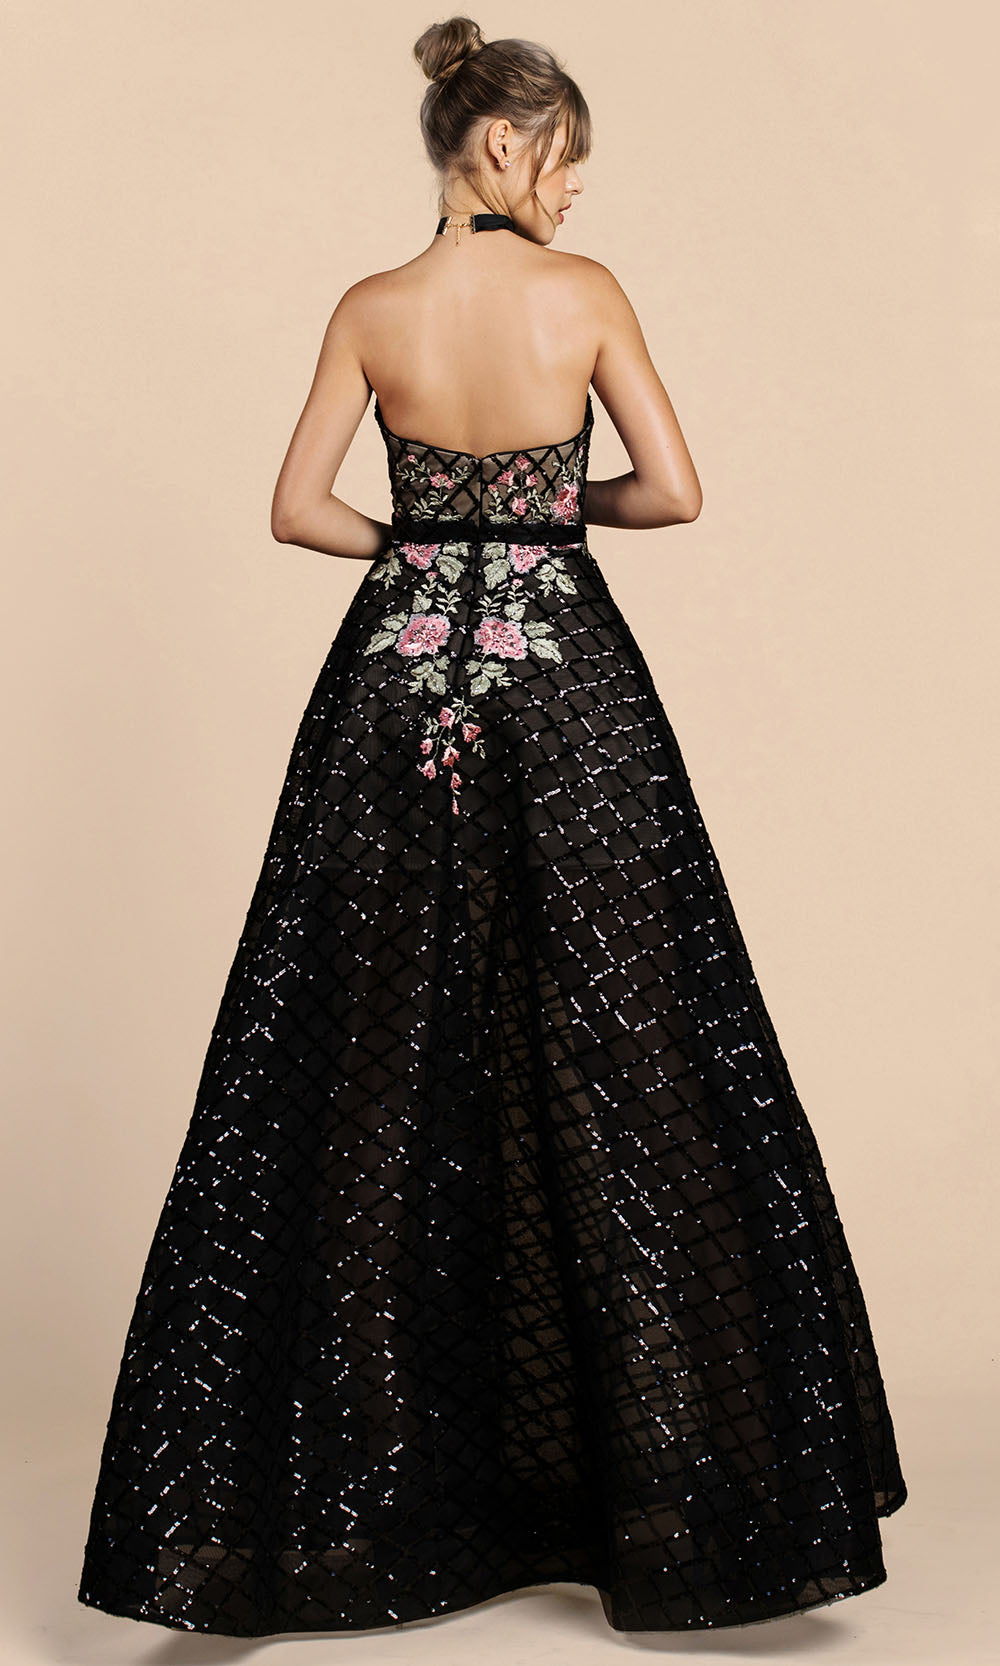 Andrea and Leo - A0393 Strapless Lattice Floral A-Line Dress In Black